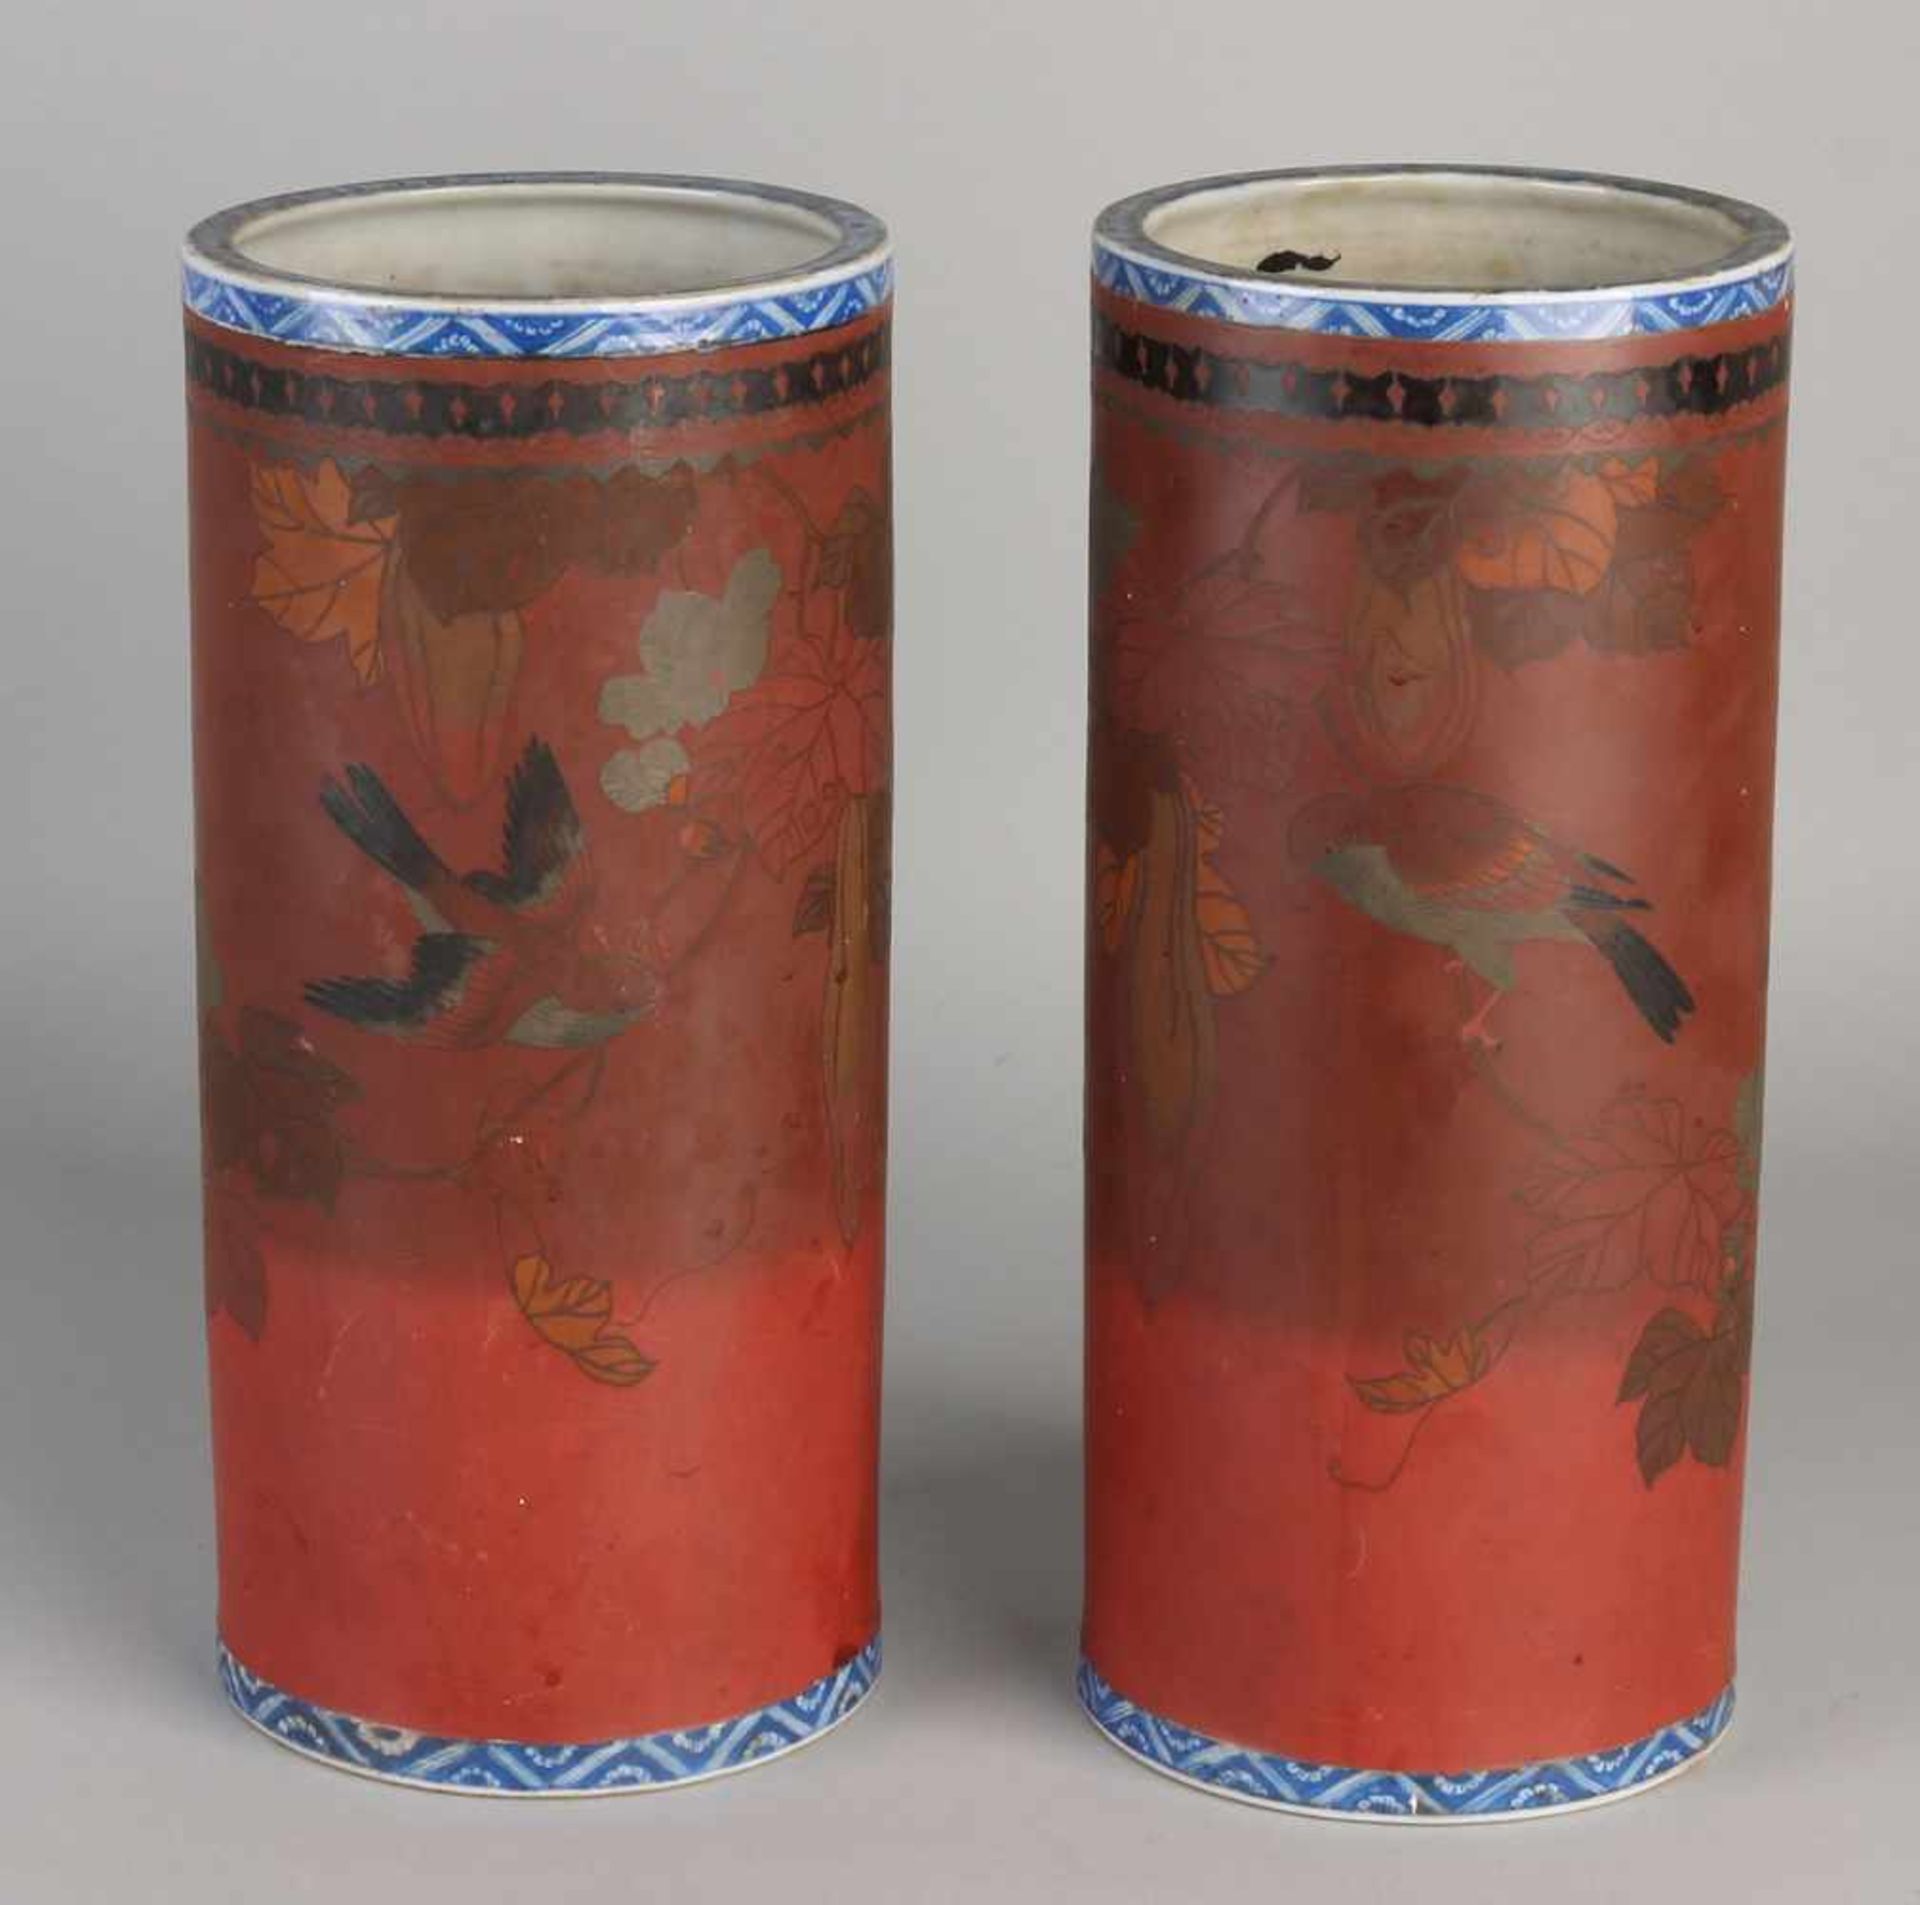 Two rare Chinese porcelain cylinder vases with brown glaze, birds / butterflies and floral decor.